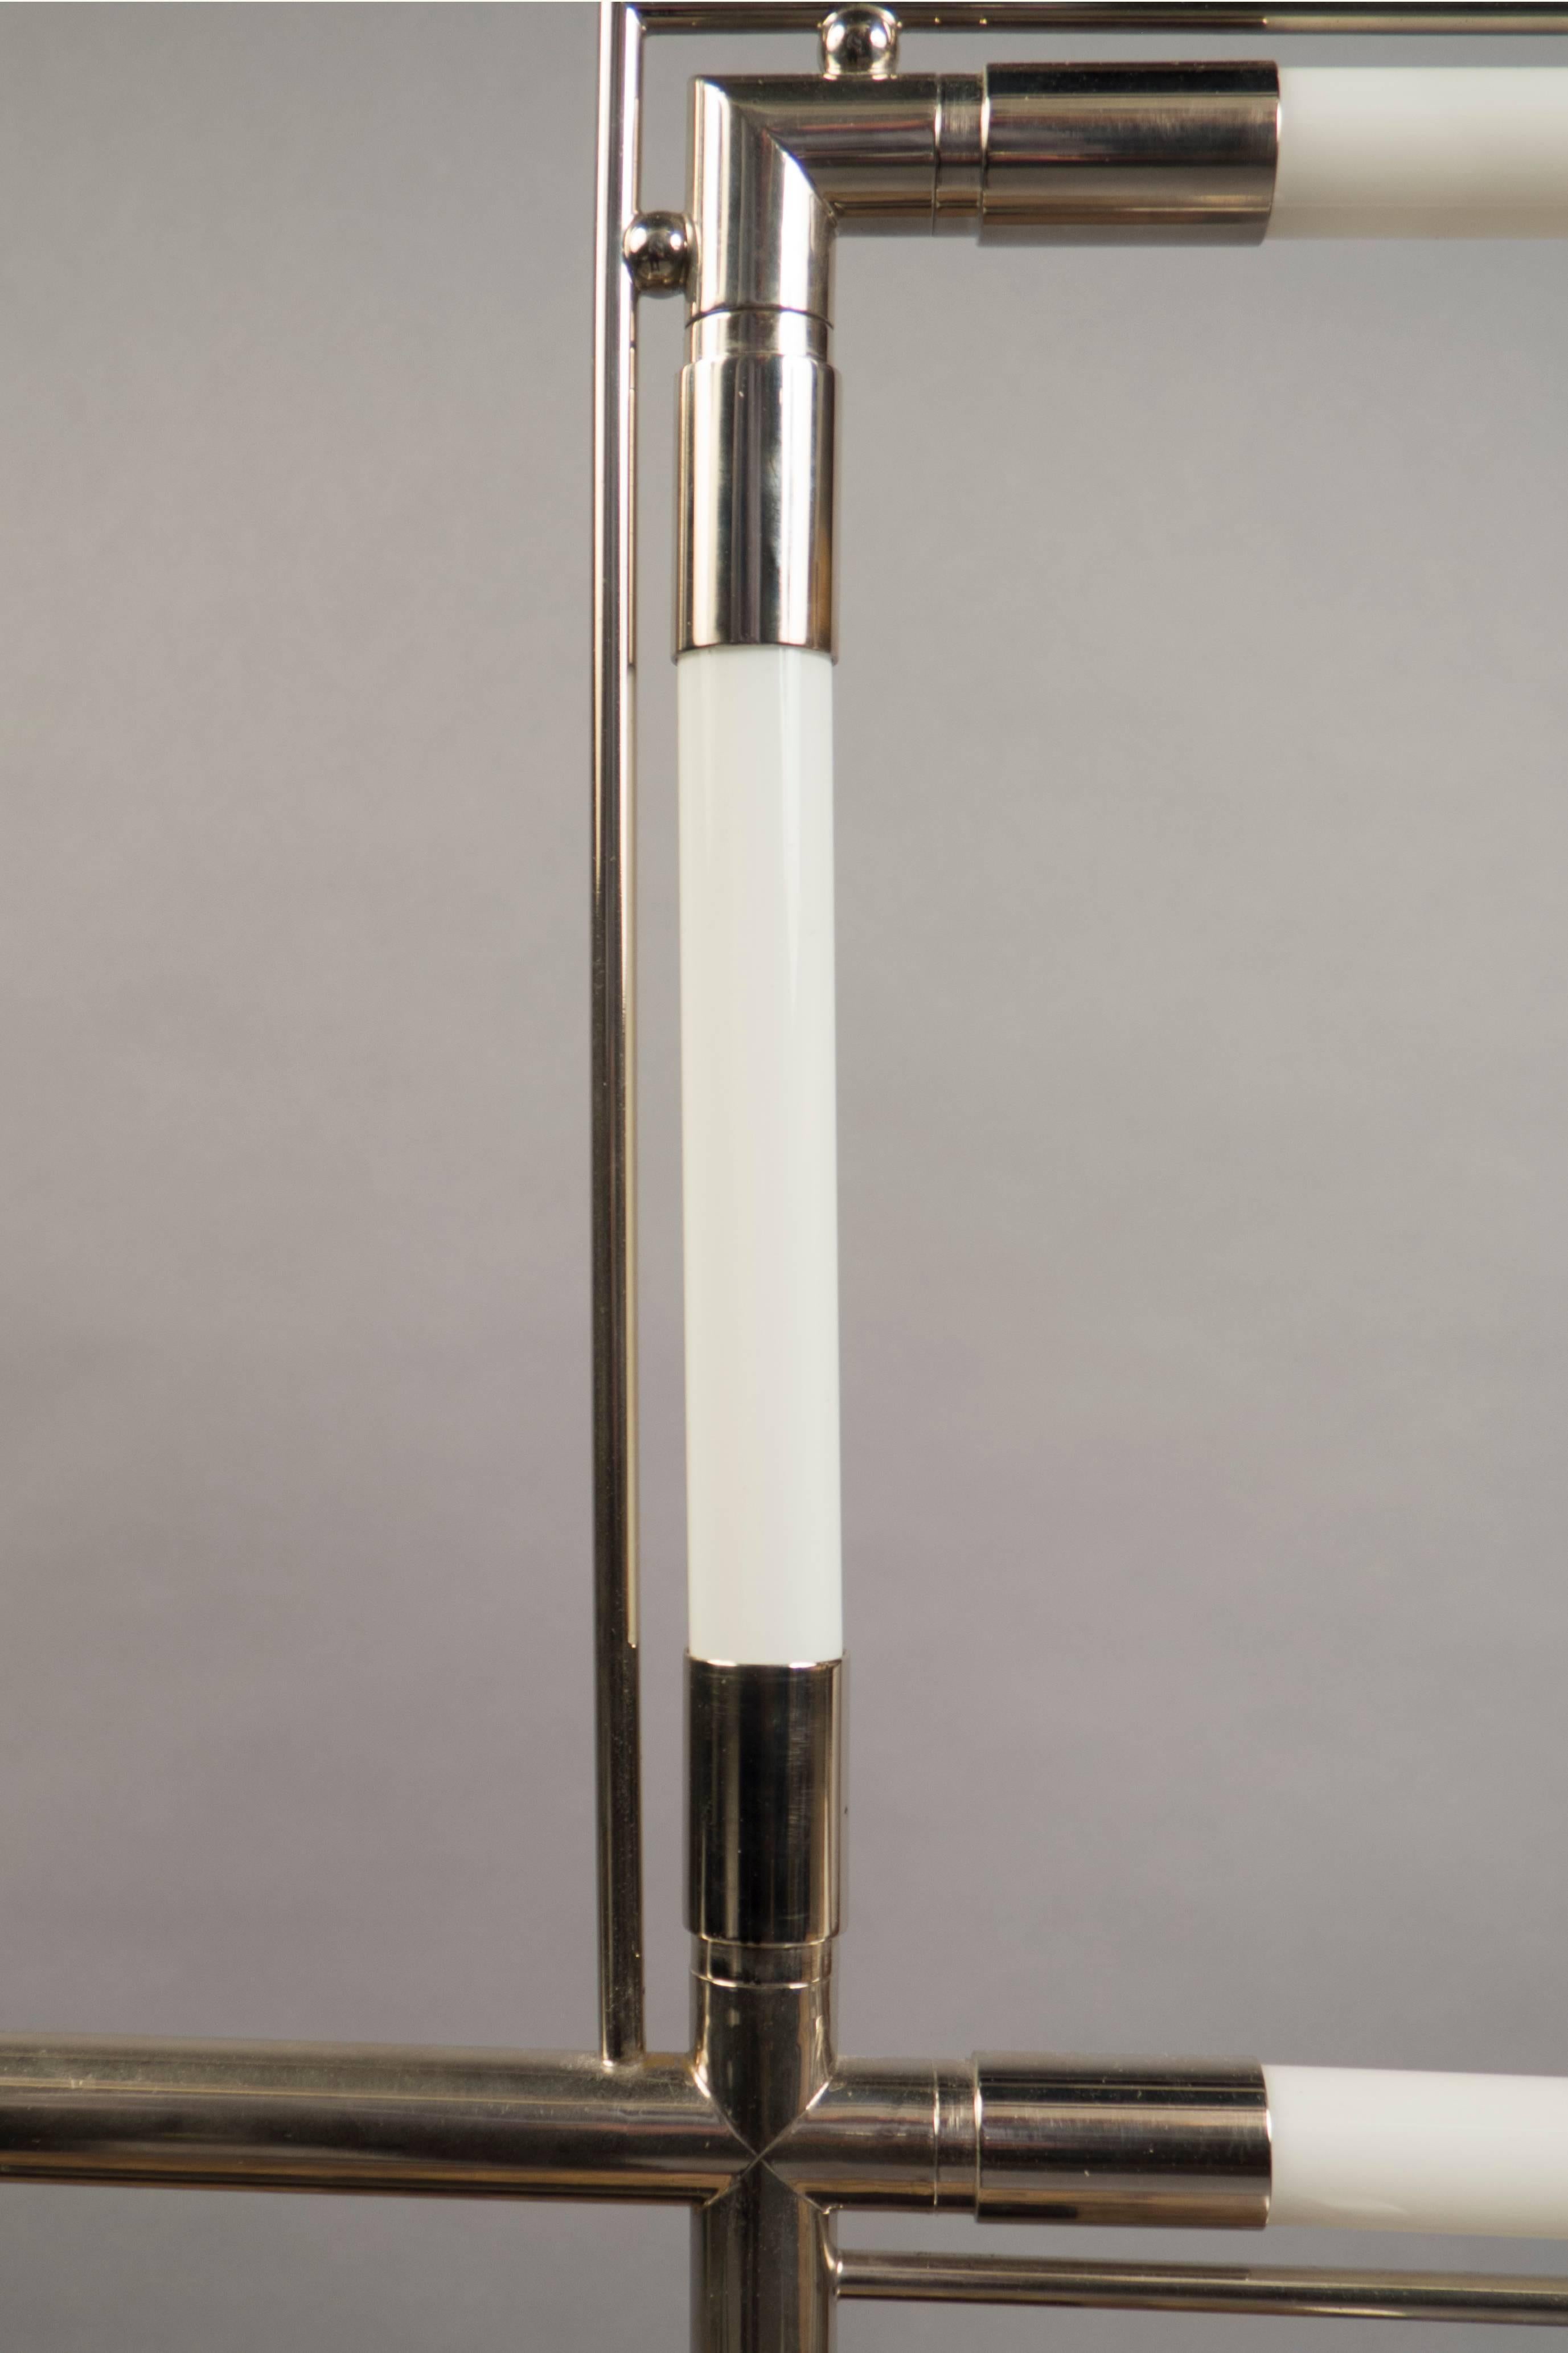 Chrome and glass table lamp, formed of two squares. Model “Quatro”. Originally designed in 1928.
   